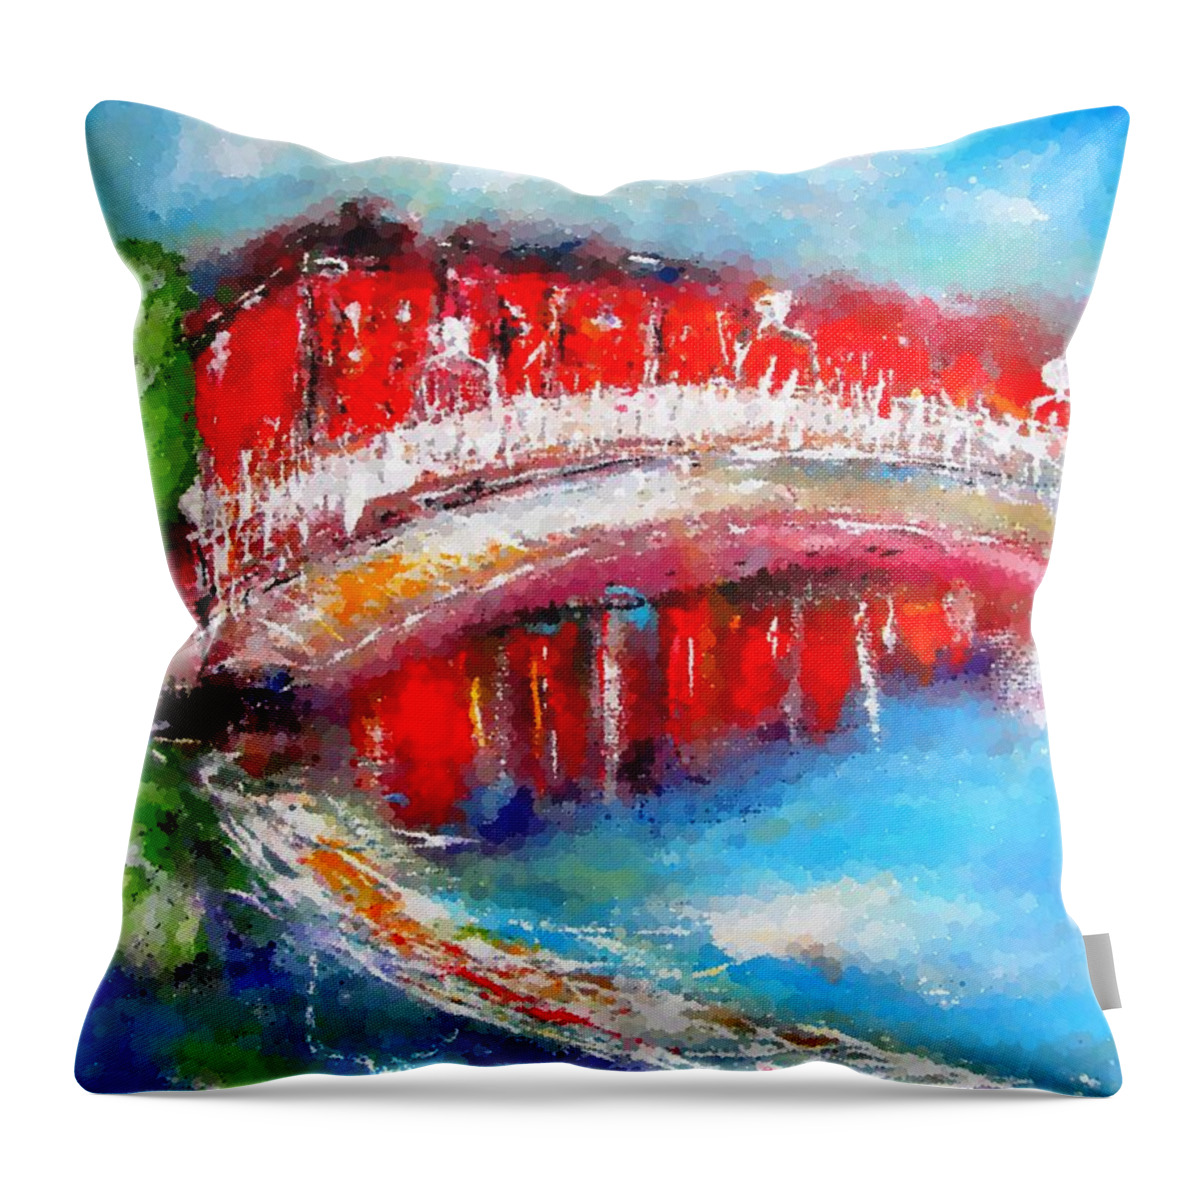 Semi Abstract Throw Pillow featuring the painting Dublin Bridge Paintings- Semi Abstract Dots by Mary Cahalan Lee - aka PIXI